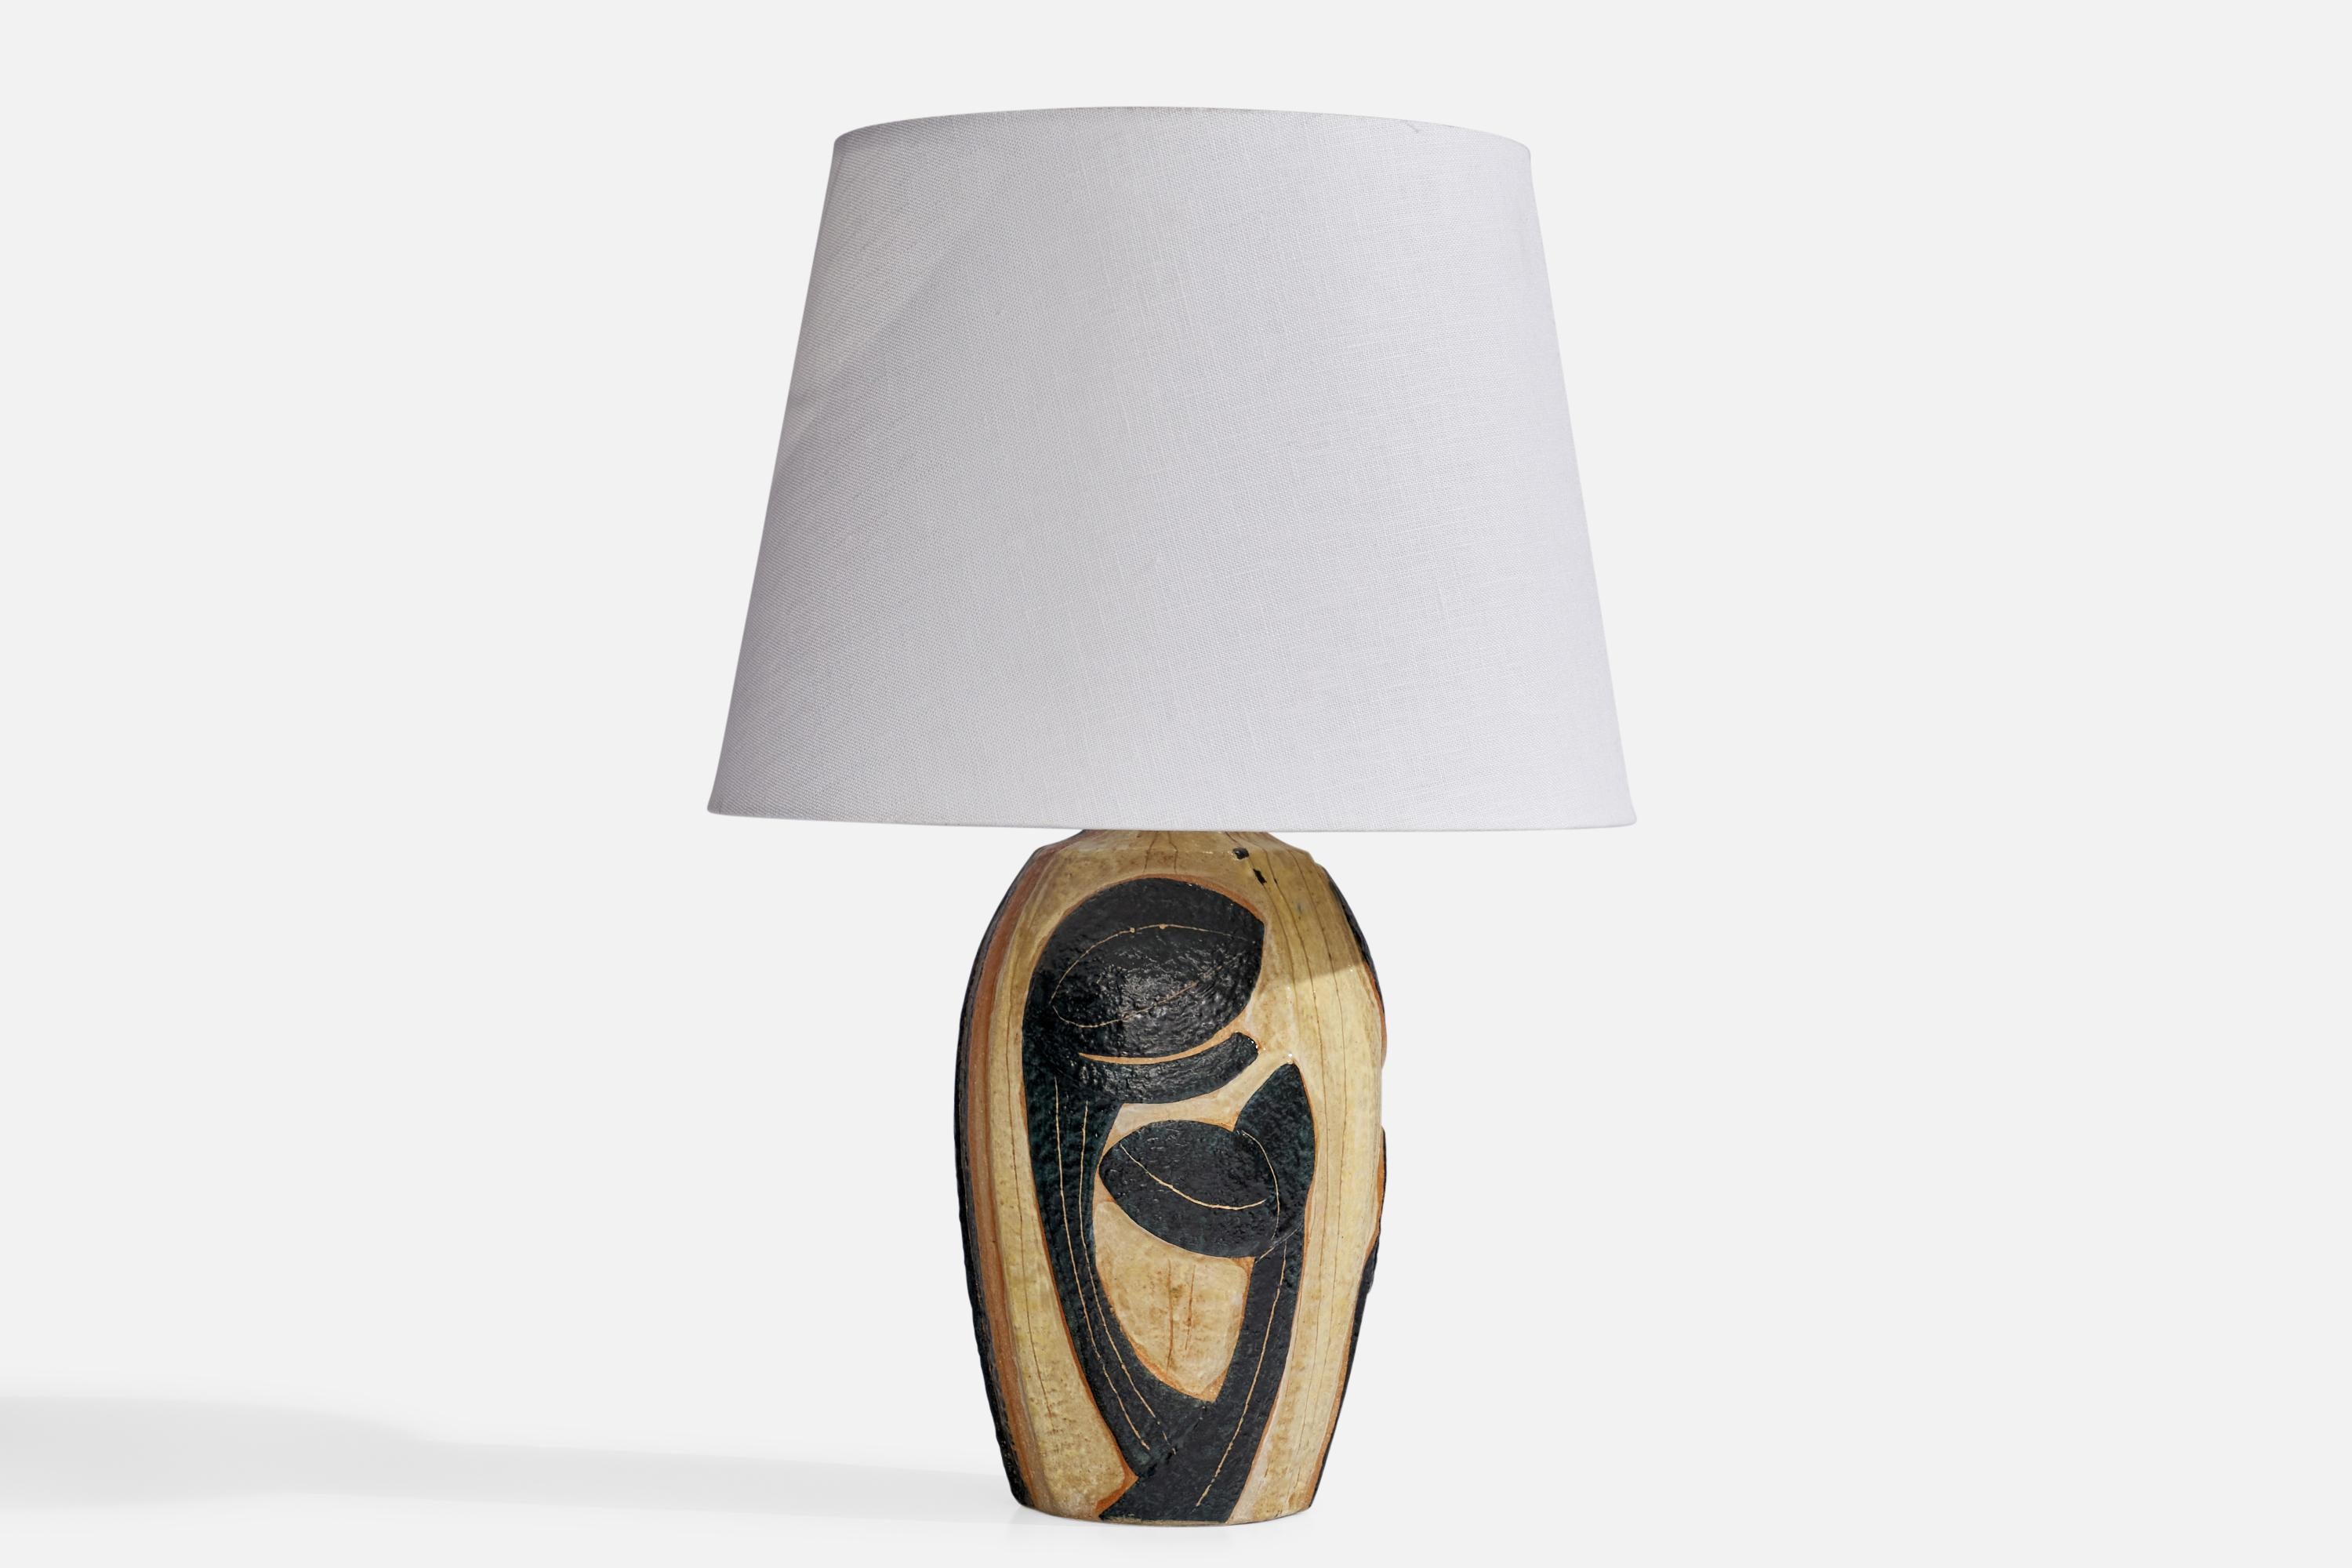 A beige and black-glazed stoneware table lamp with relief decoration, designed by Noomi Backhausen and produced by Søholm, Bornholm, Denmark, 1960s.

Dimensions of Lamp (inches): 12.3” H x 5.5” Diameter
Dimensions of Shade (inches): 9” Top Diameter